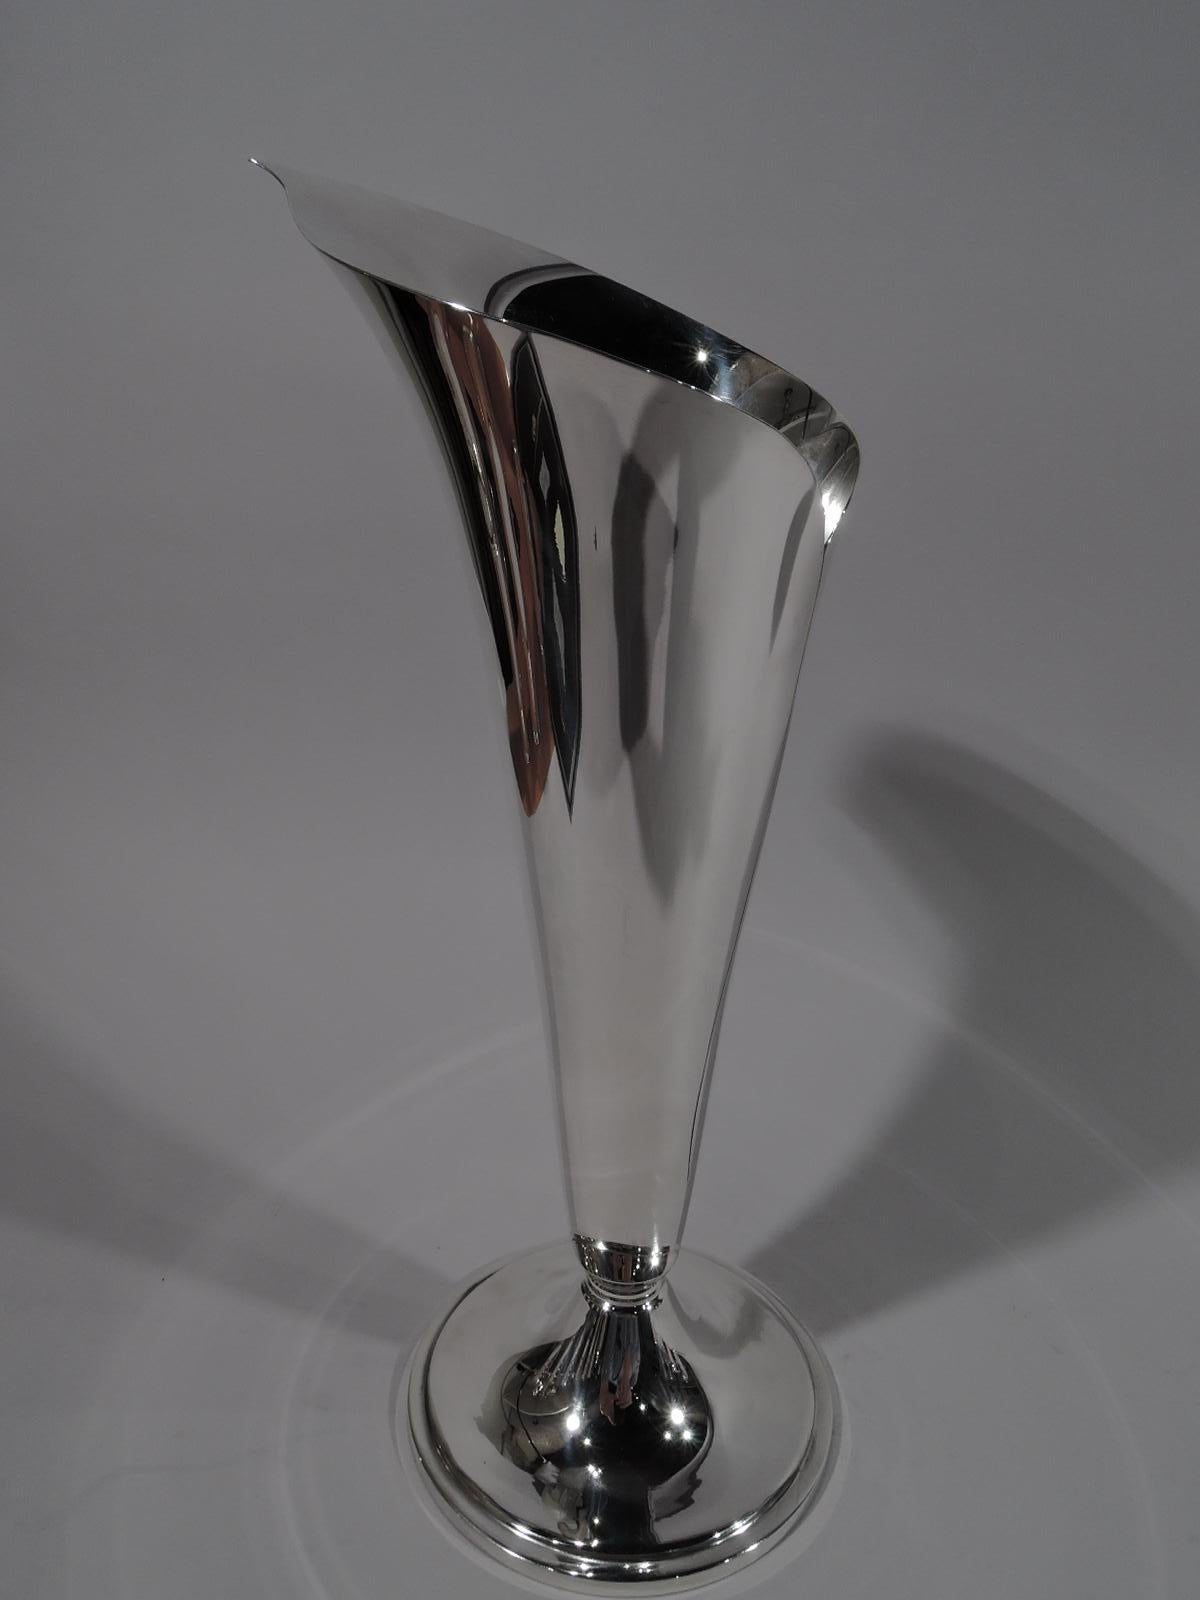 Mid-Century Modern sterling silver vase. Made by Tiffany & Co. in New York. In form of abstract wrapped leaf with asymmetrical mouth and irregular seam. Raised round foot. Fully marked including Postwar pattern no. 23425. Weight: 21.5 troy ounces.